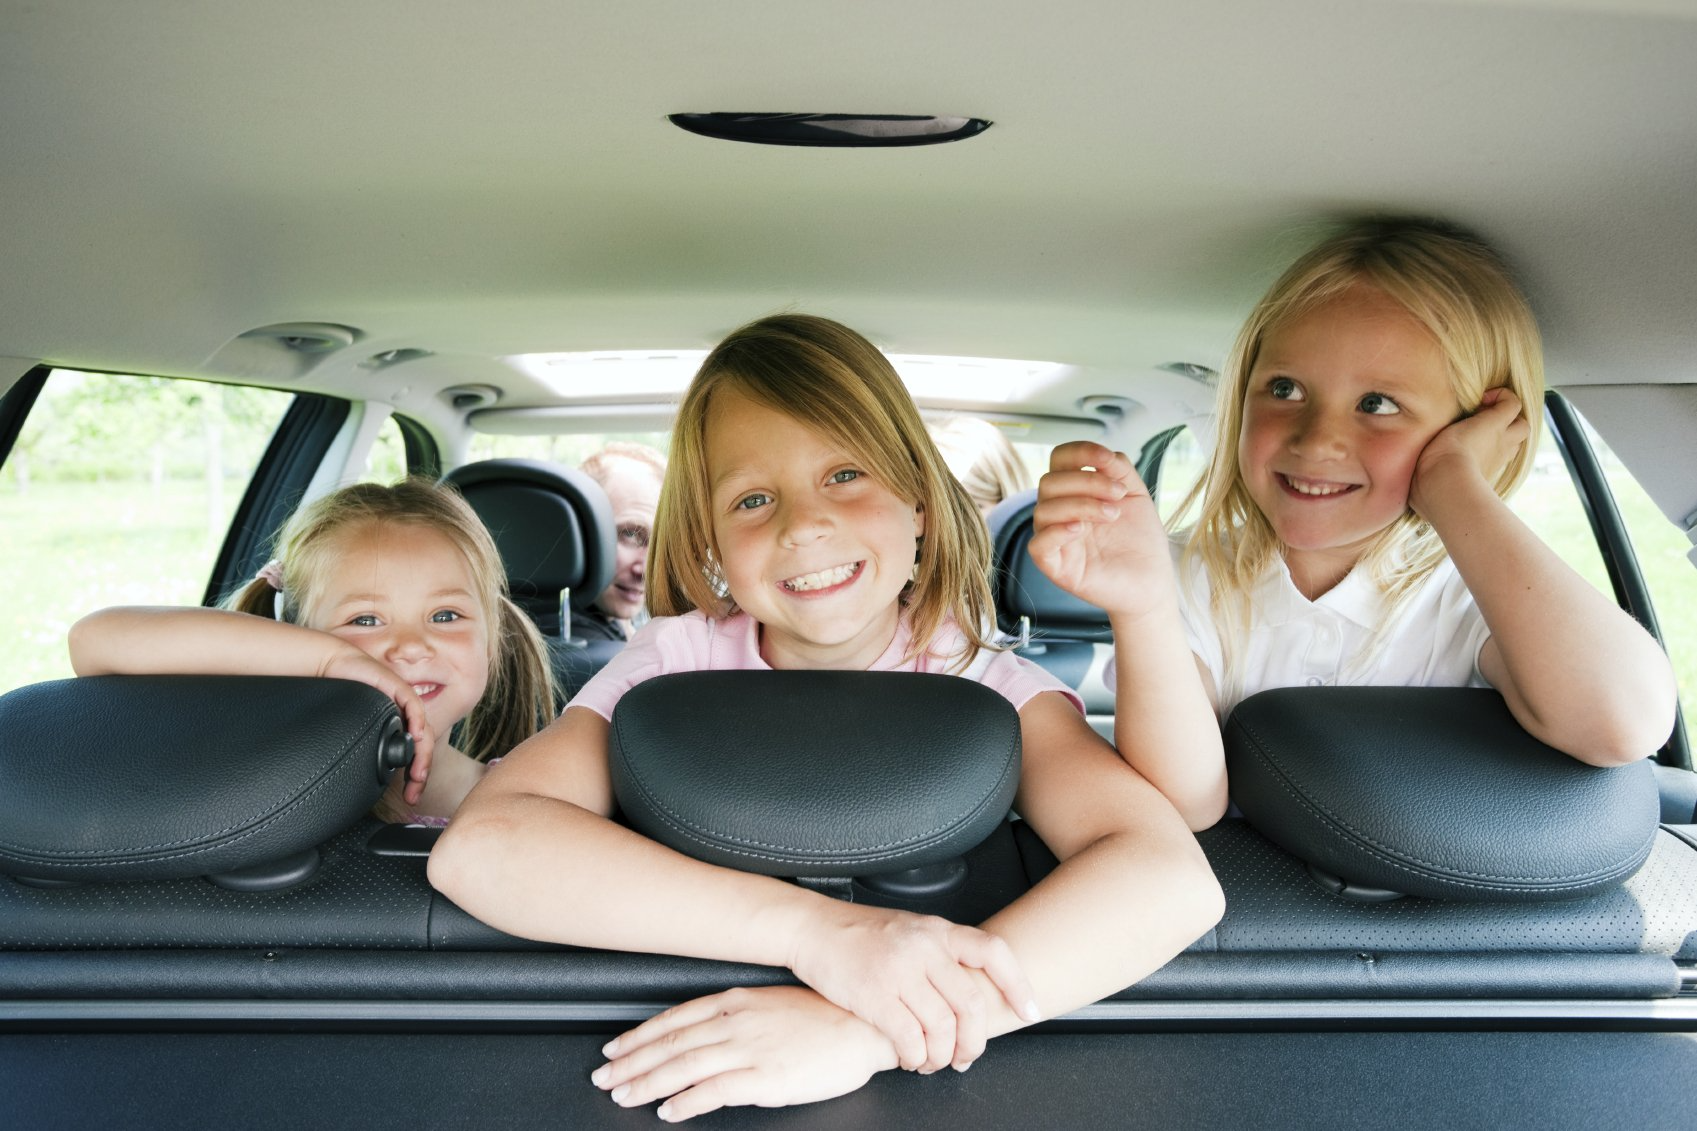 Transfers to Bella Luna Apartments with car baby seats